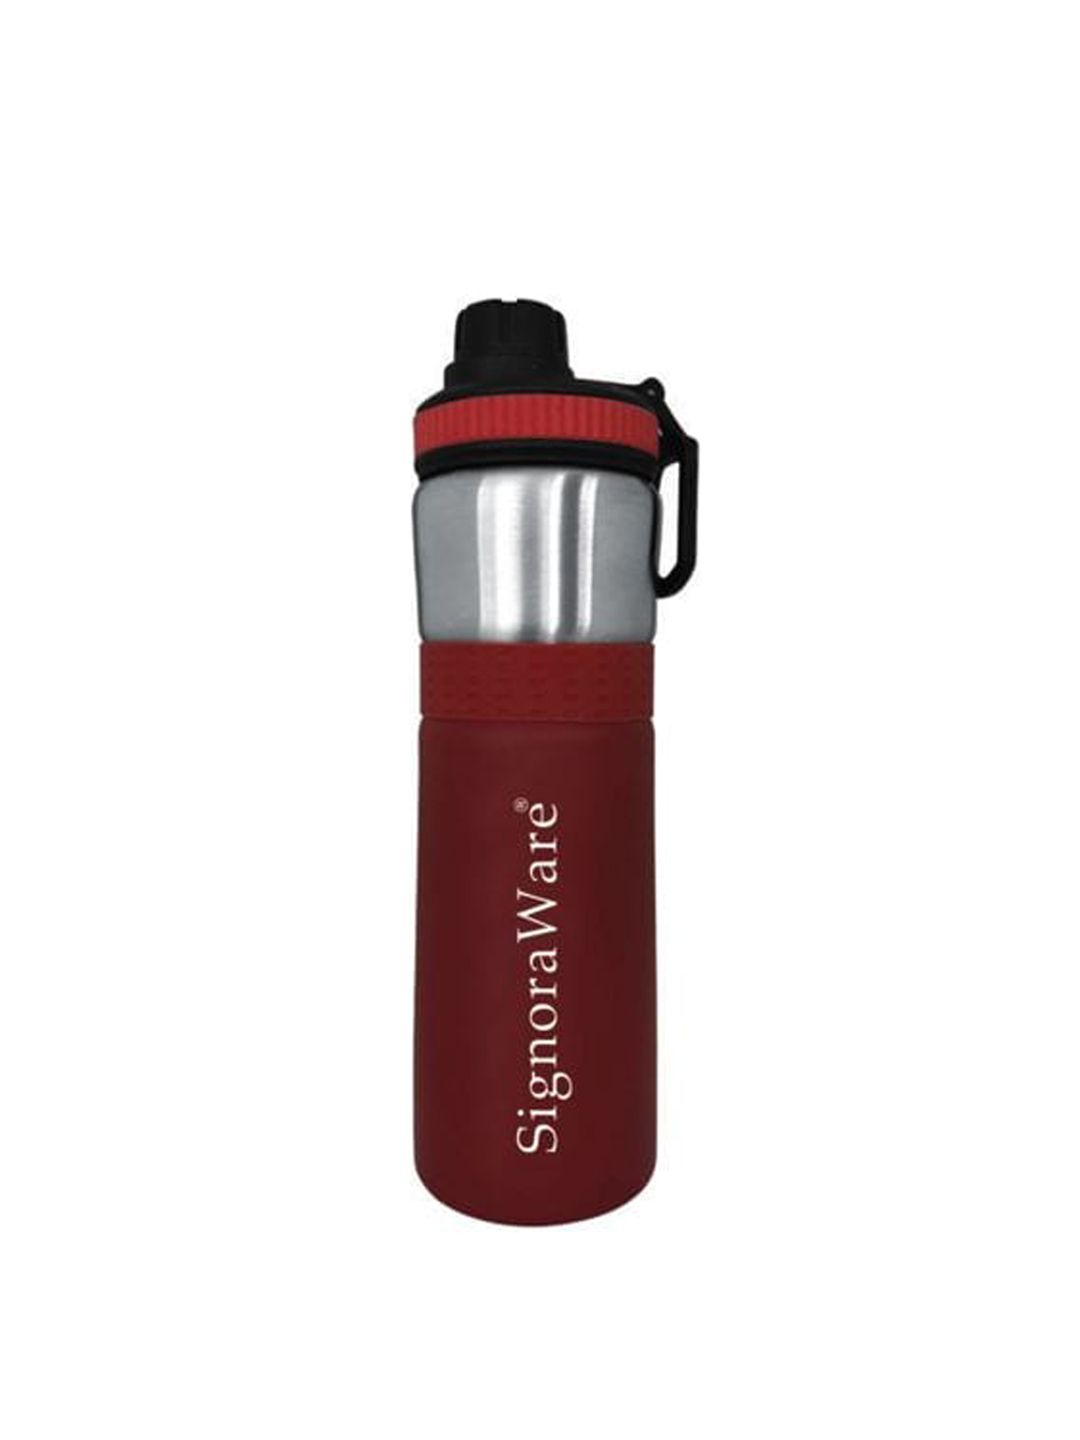 SignoraWare Red Solid Stainless Steel Water Bottle Price in India